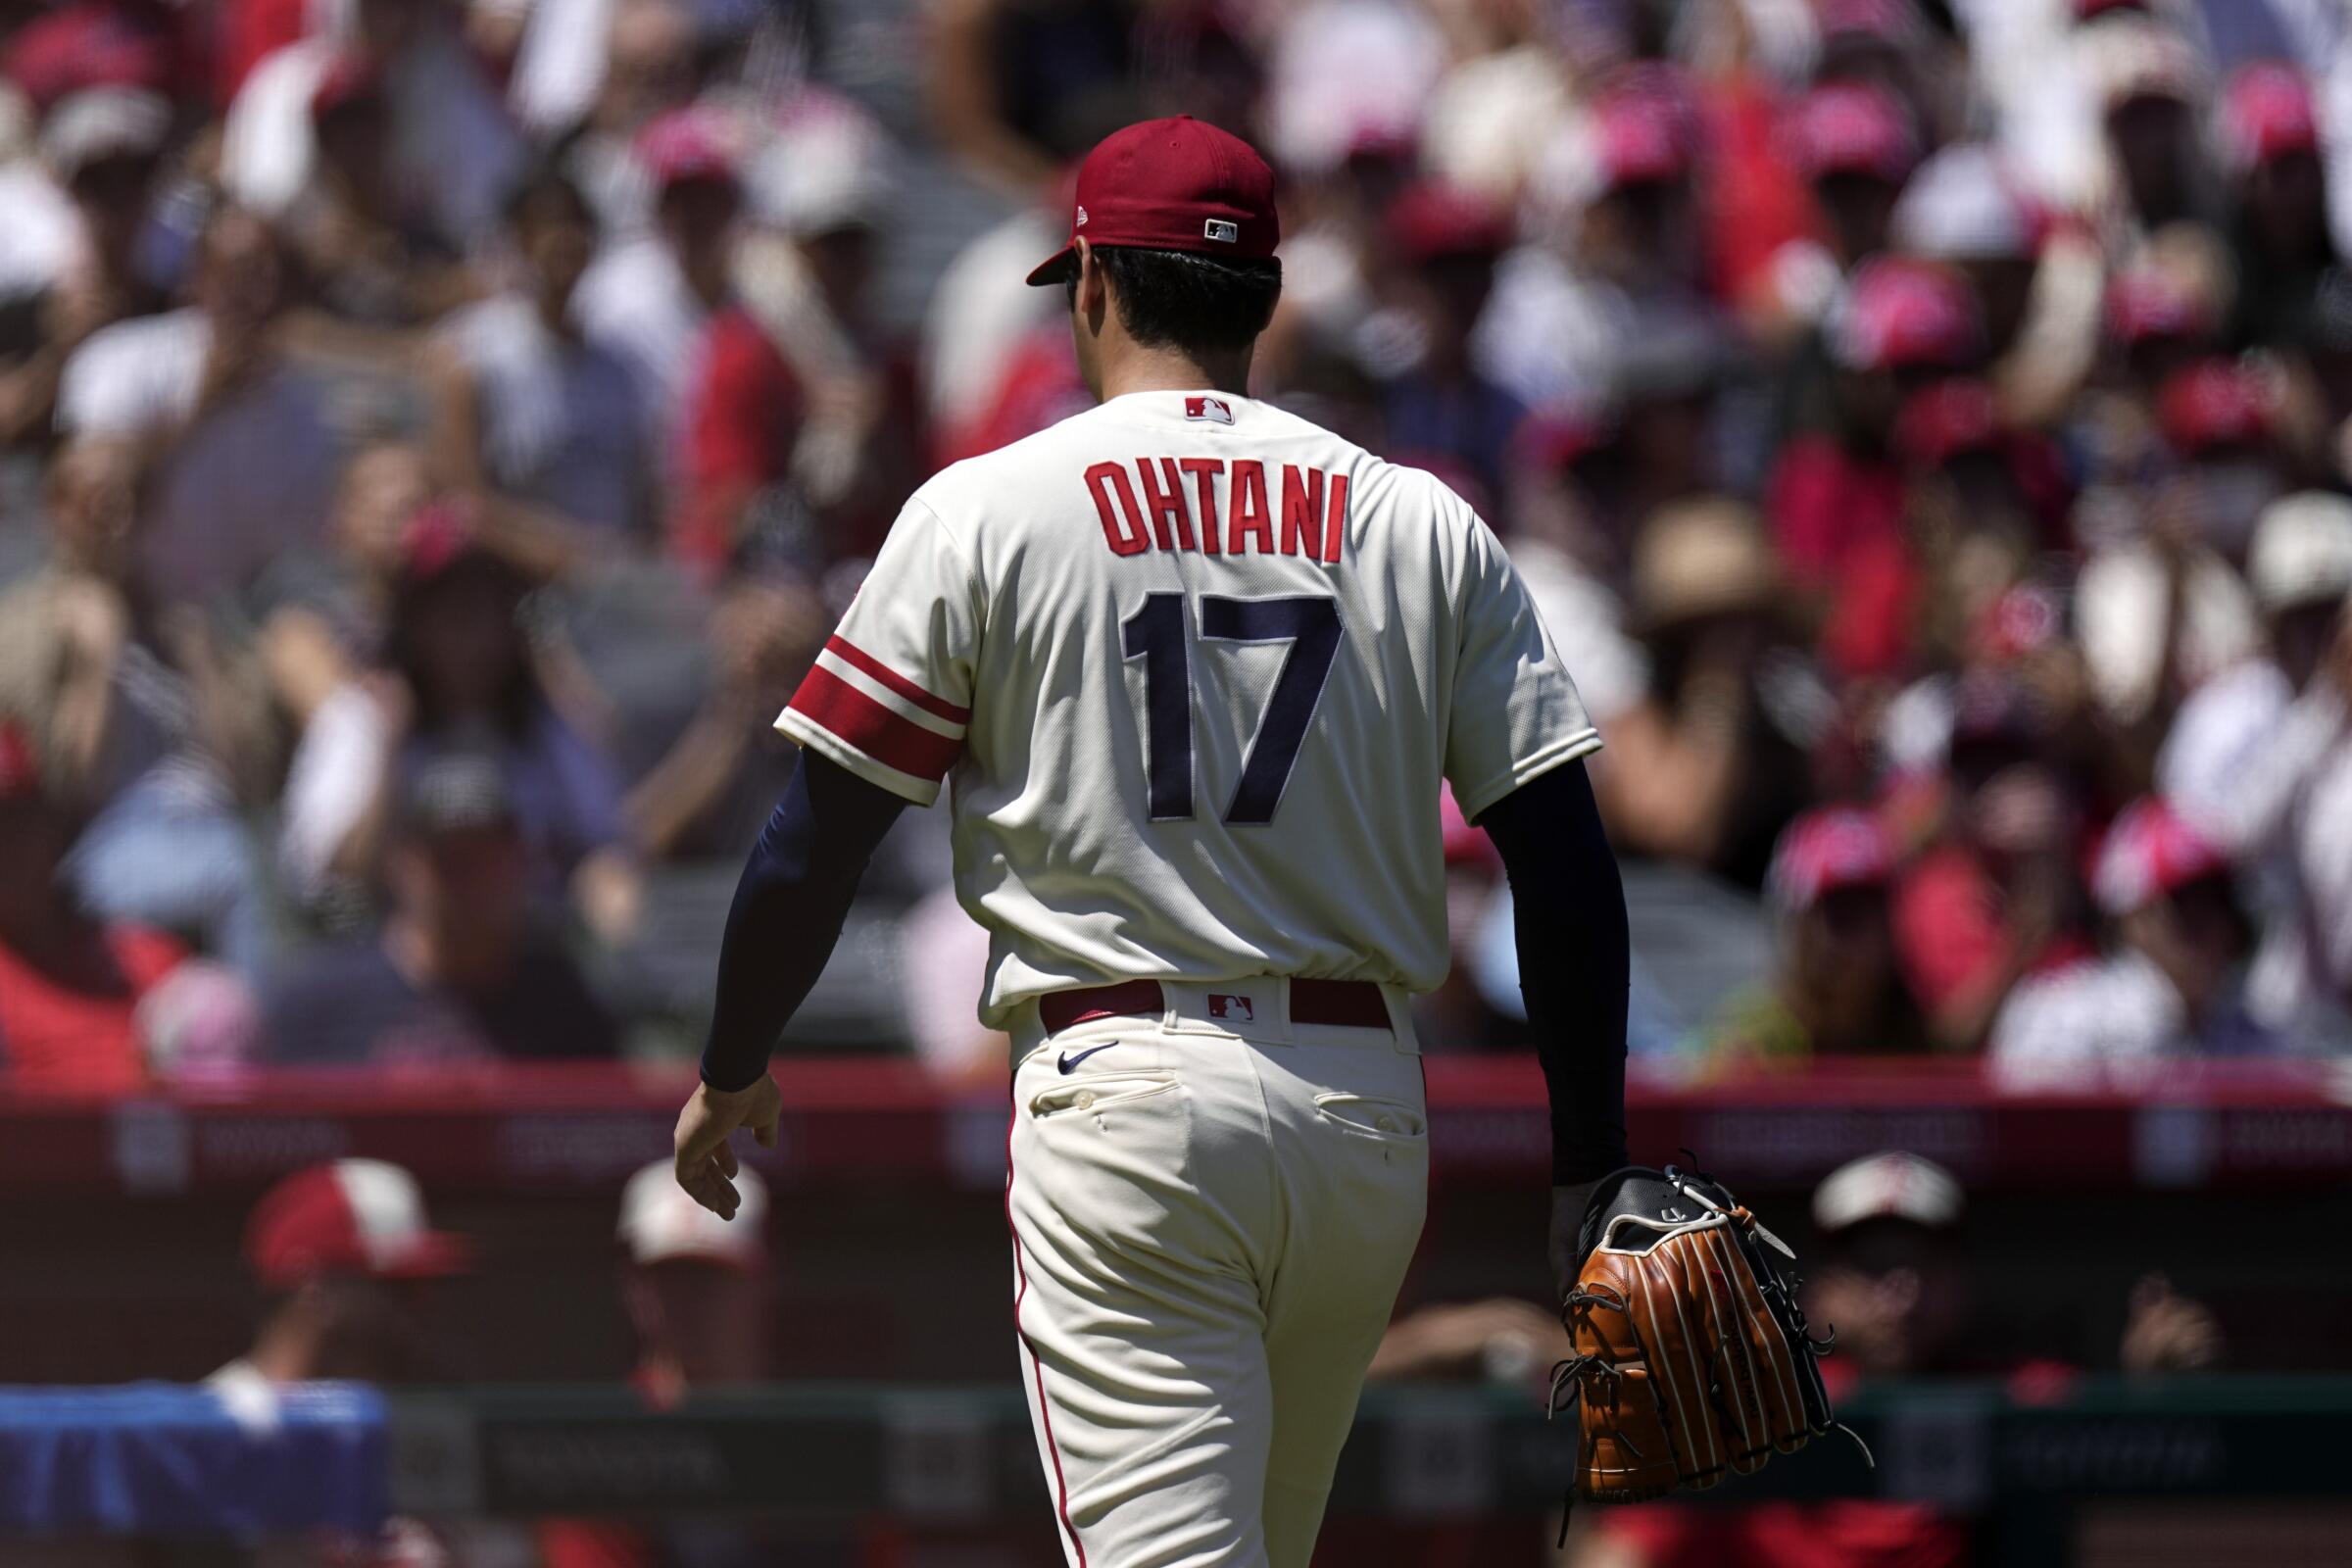 Shohei Ohtani has a torn UCL and everything is bad - A Hunt and